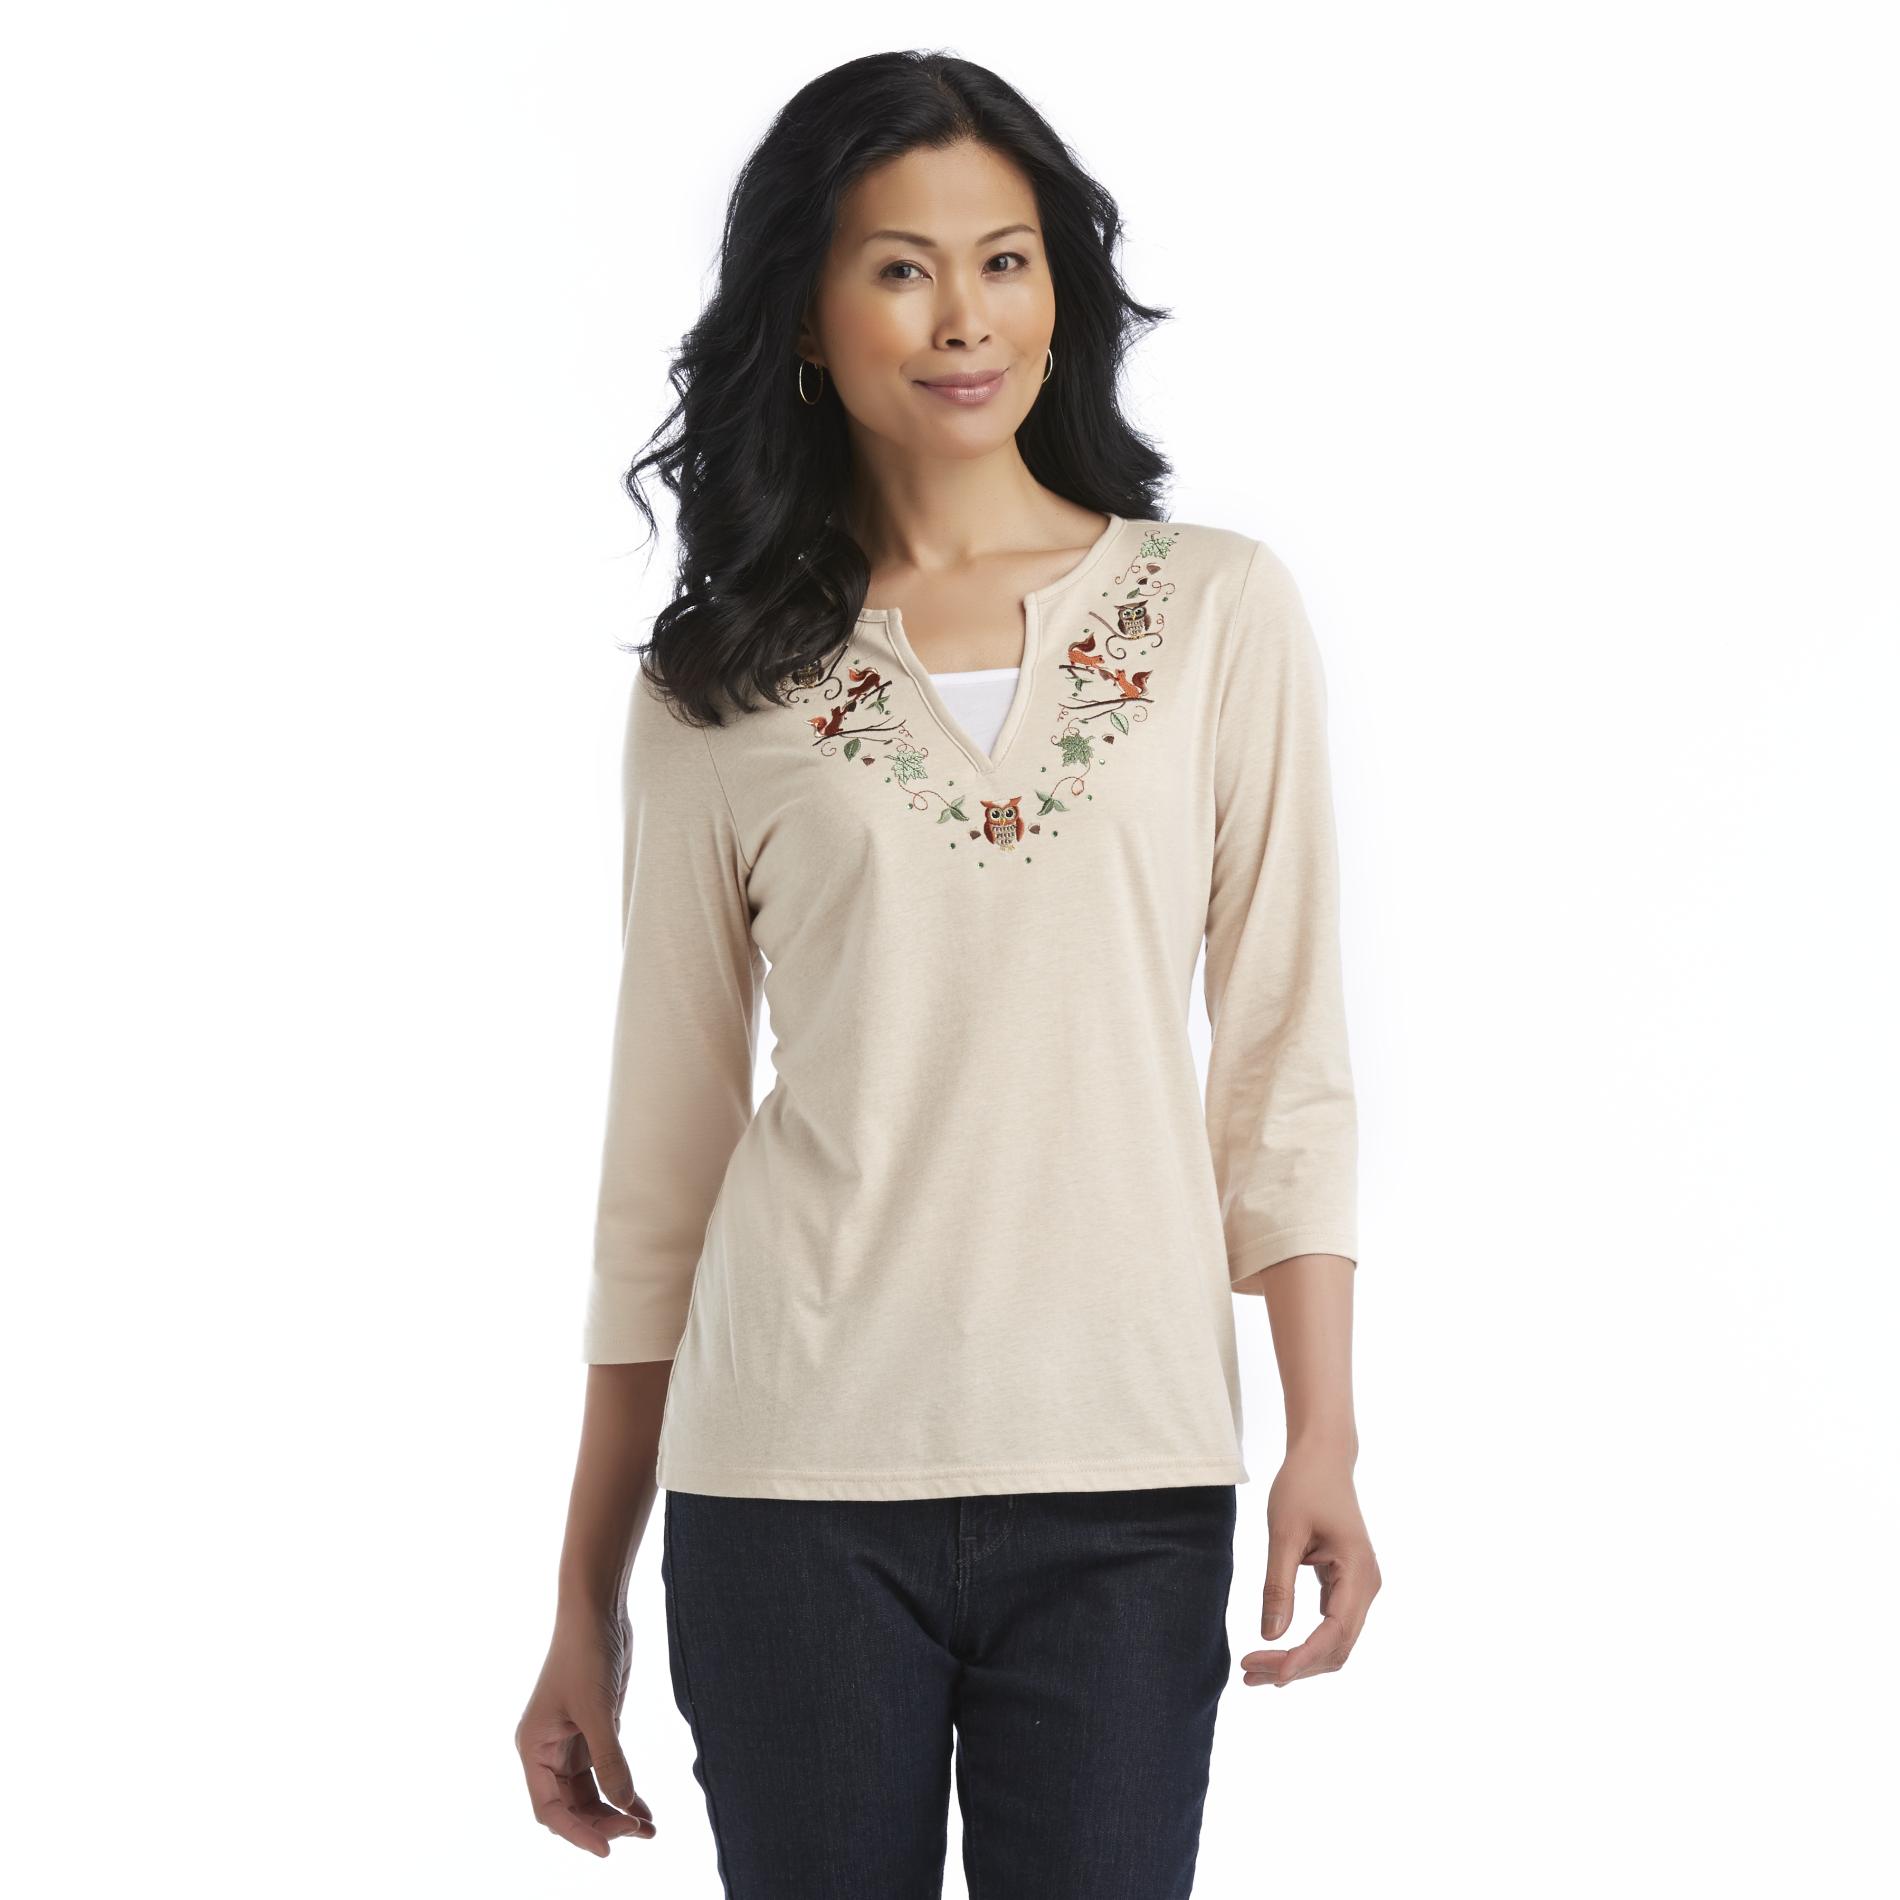 Basic Editions Women's Layered-Look Top - Owls & Squirrels